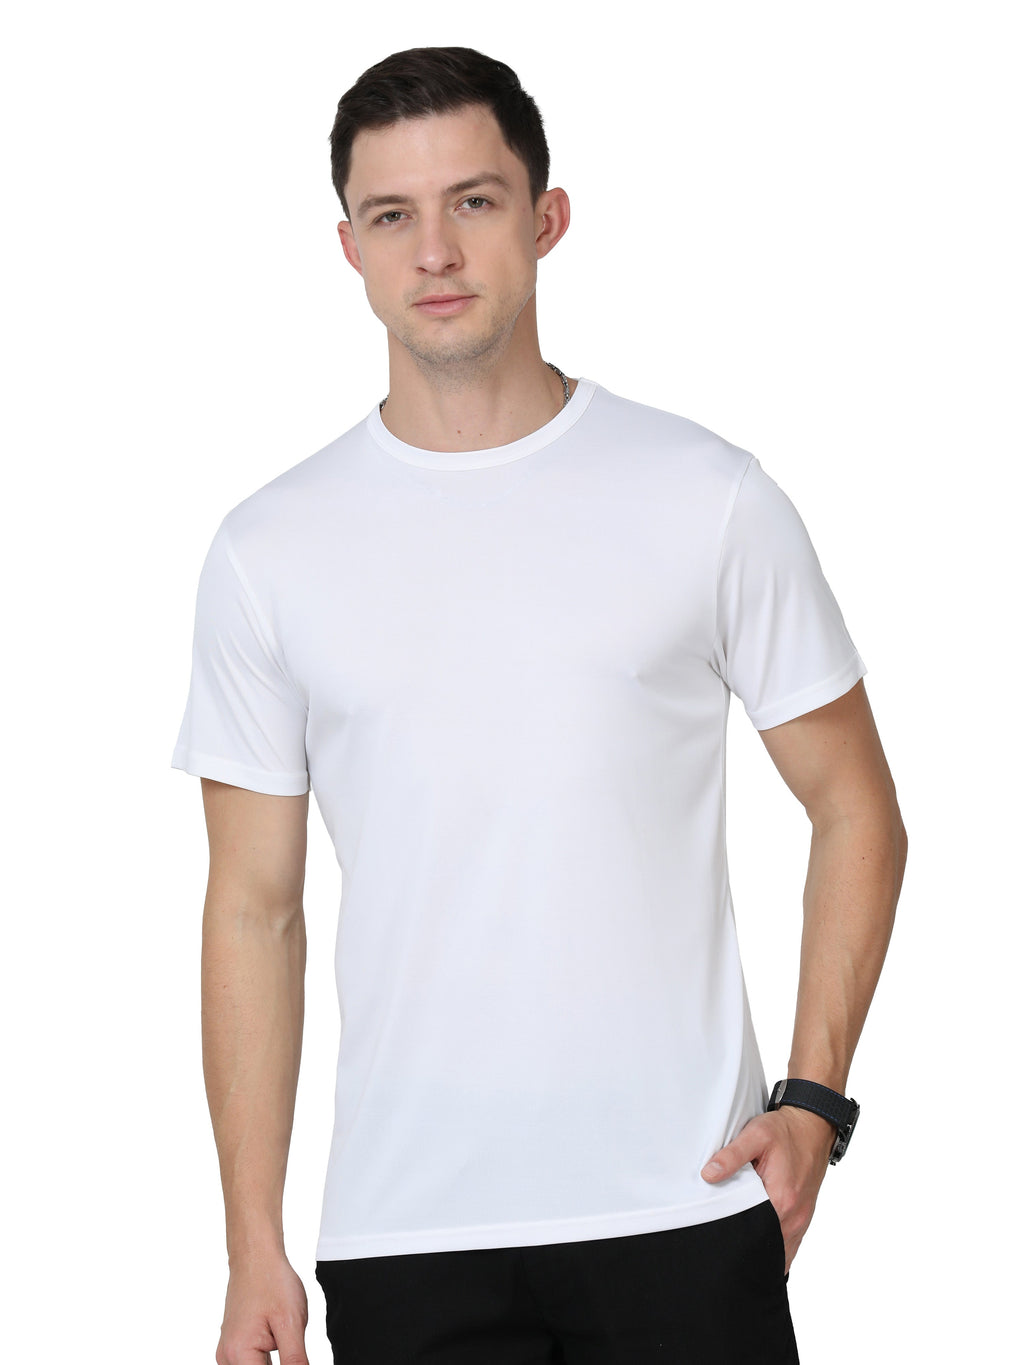 Pick Your Own Choice - Men's rPET Round Neck TShirt Combo